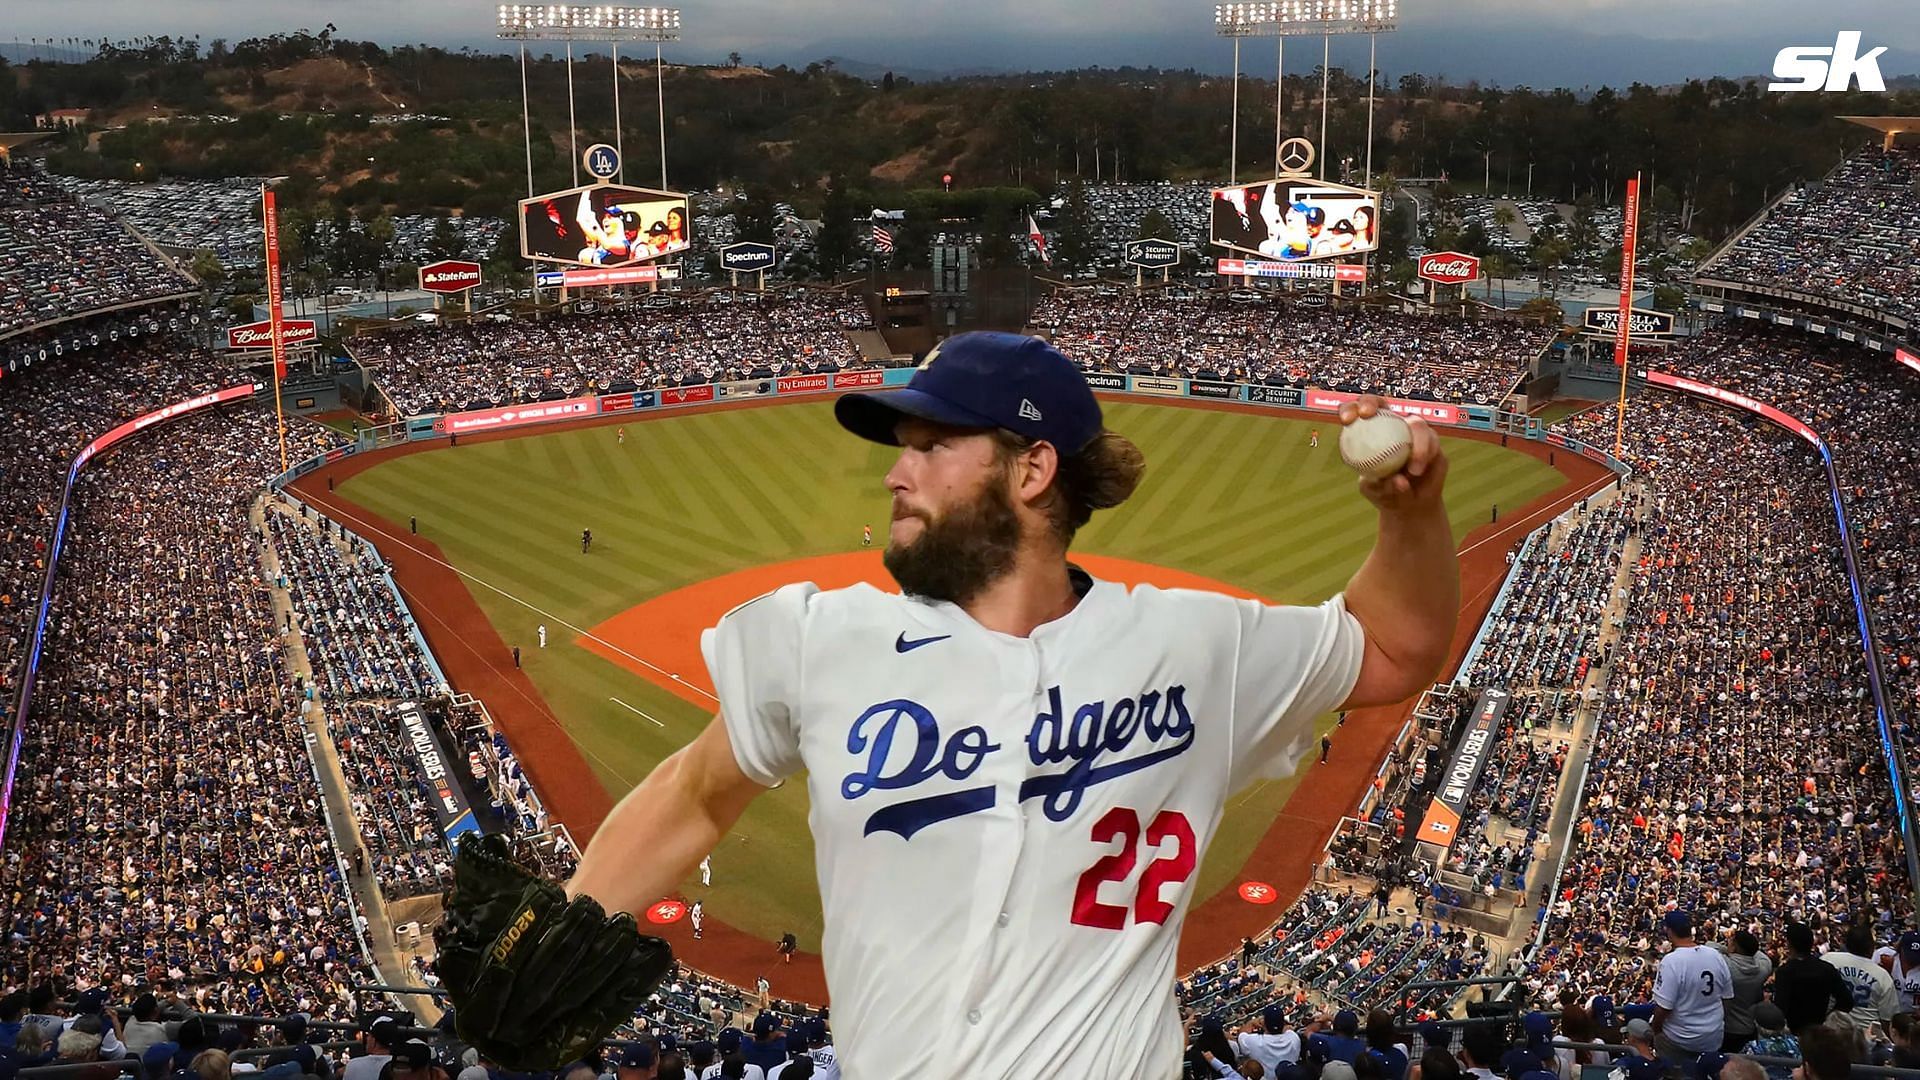 MLB on X: For the first time since June, Clayton Kershaw will toe